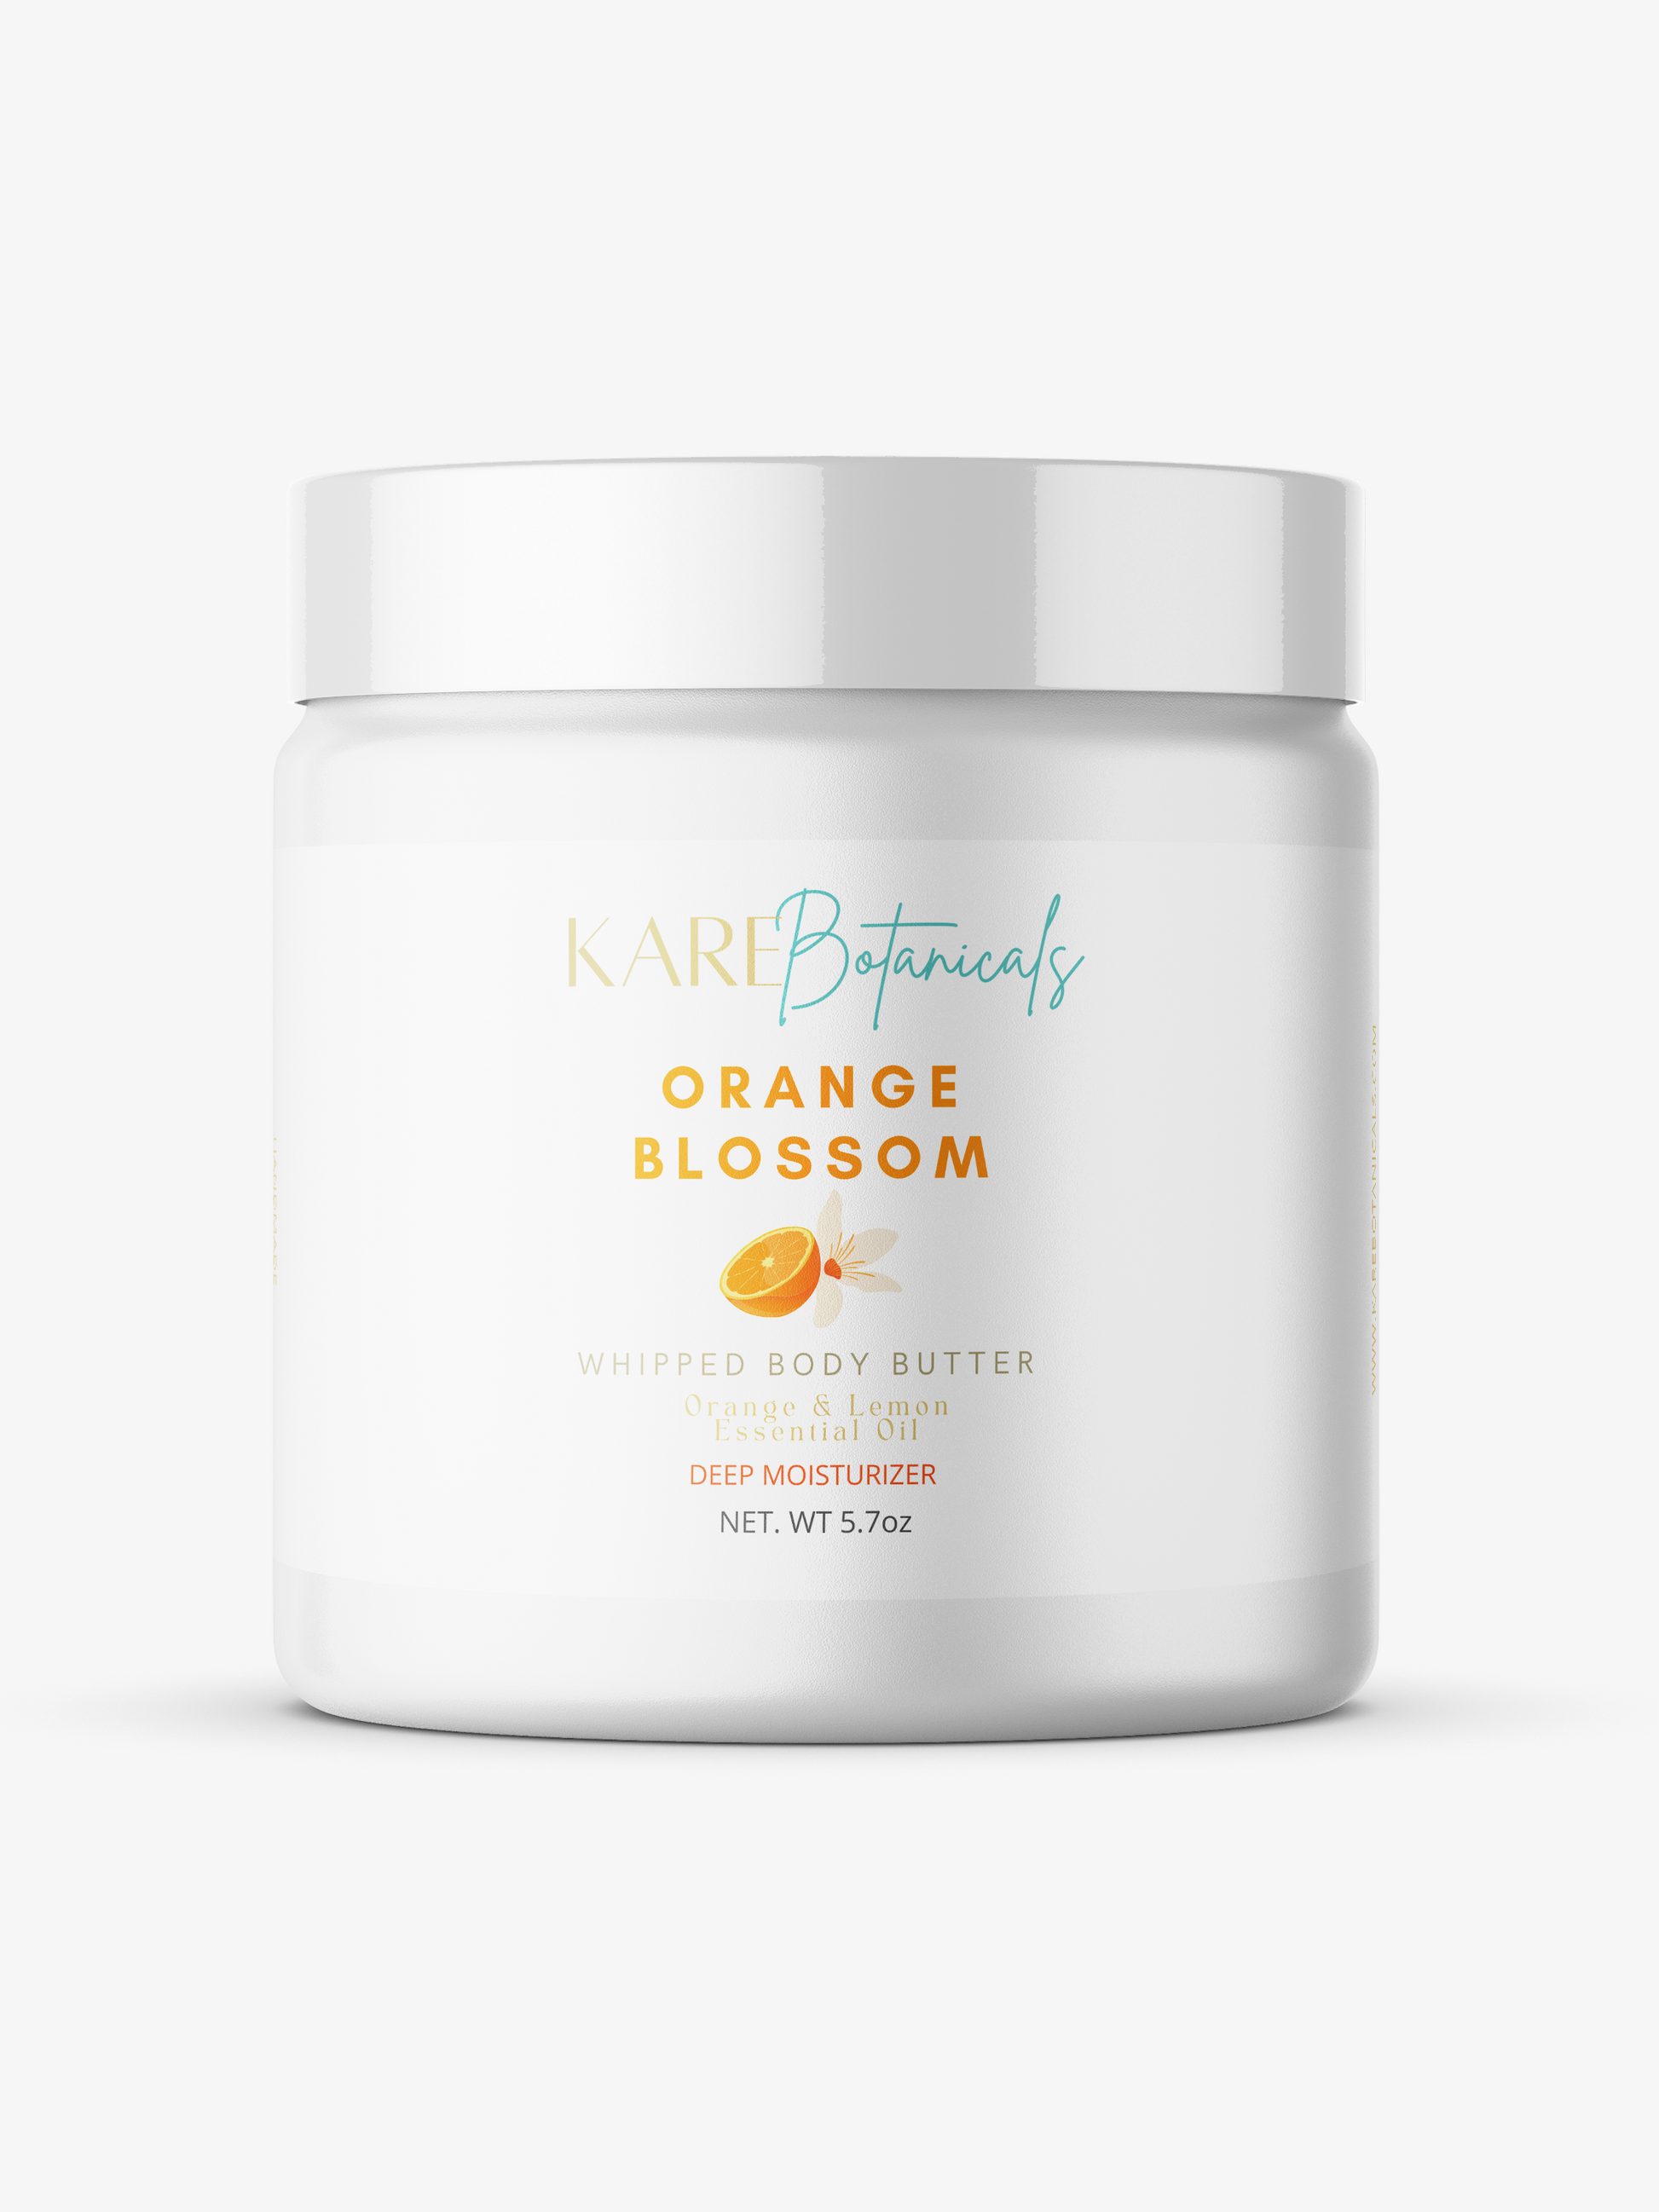 Kare Botanicals Orange Blossom whipped body butter for all/neutral. Deep moisturizing, scented body lotion with organic orange and organic lemon essential oils. Palm-oil free. Made with shea butter, mango butter and coconut oil. Has a luxurious citrus fragrance.